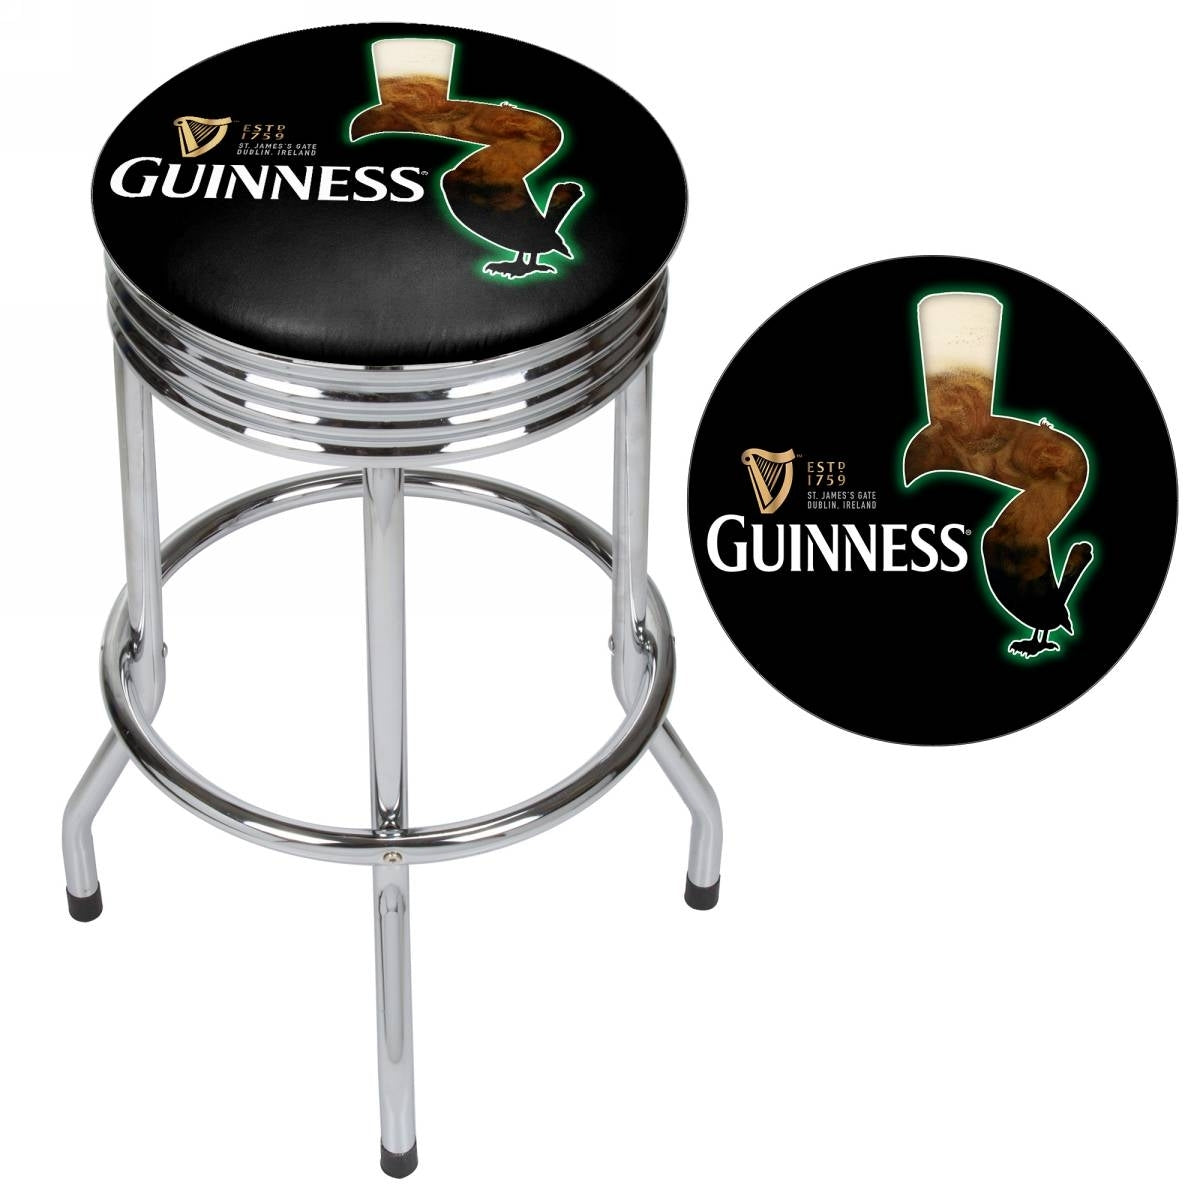 Guinness Chrome Ribbed Bar Stool - Feathering featuring the iconic Guinness Toucan.